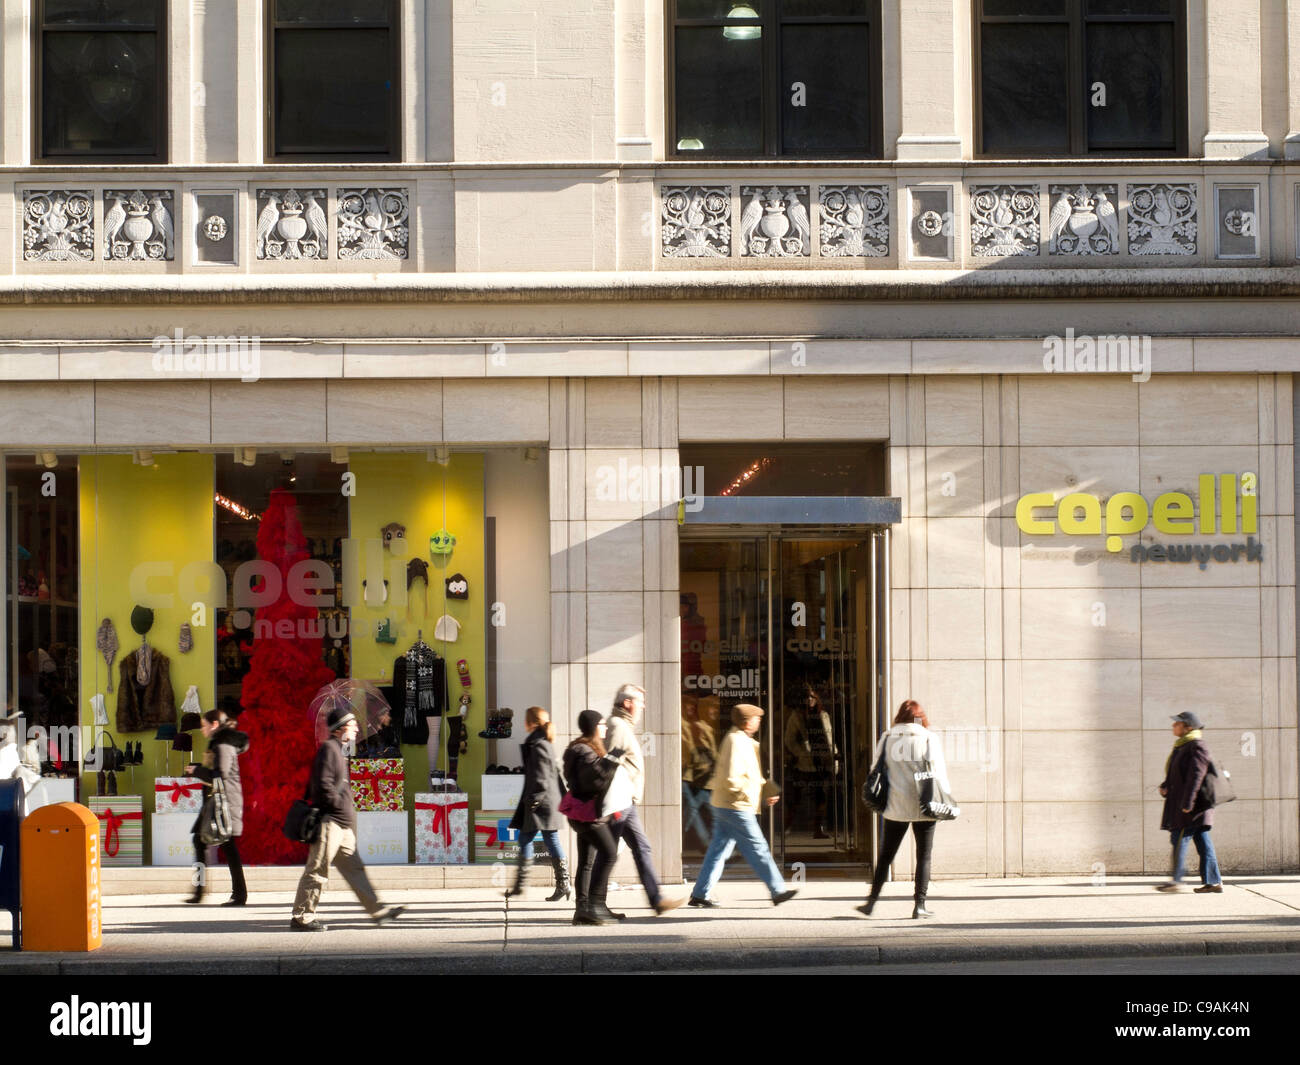 Capelli New York, Clothing Store Facade, Fifth Avenue, NYC Stock Photo